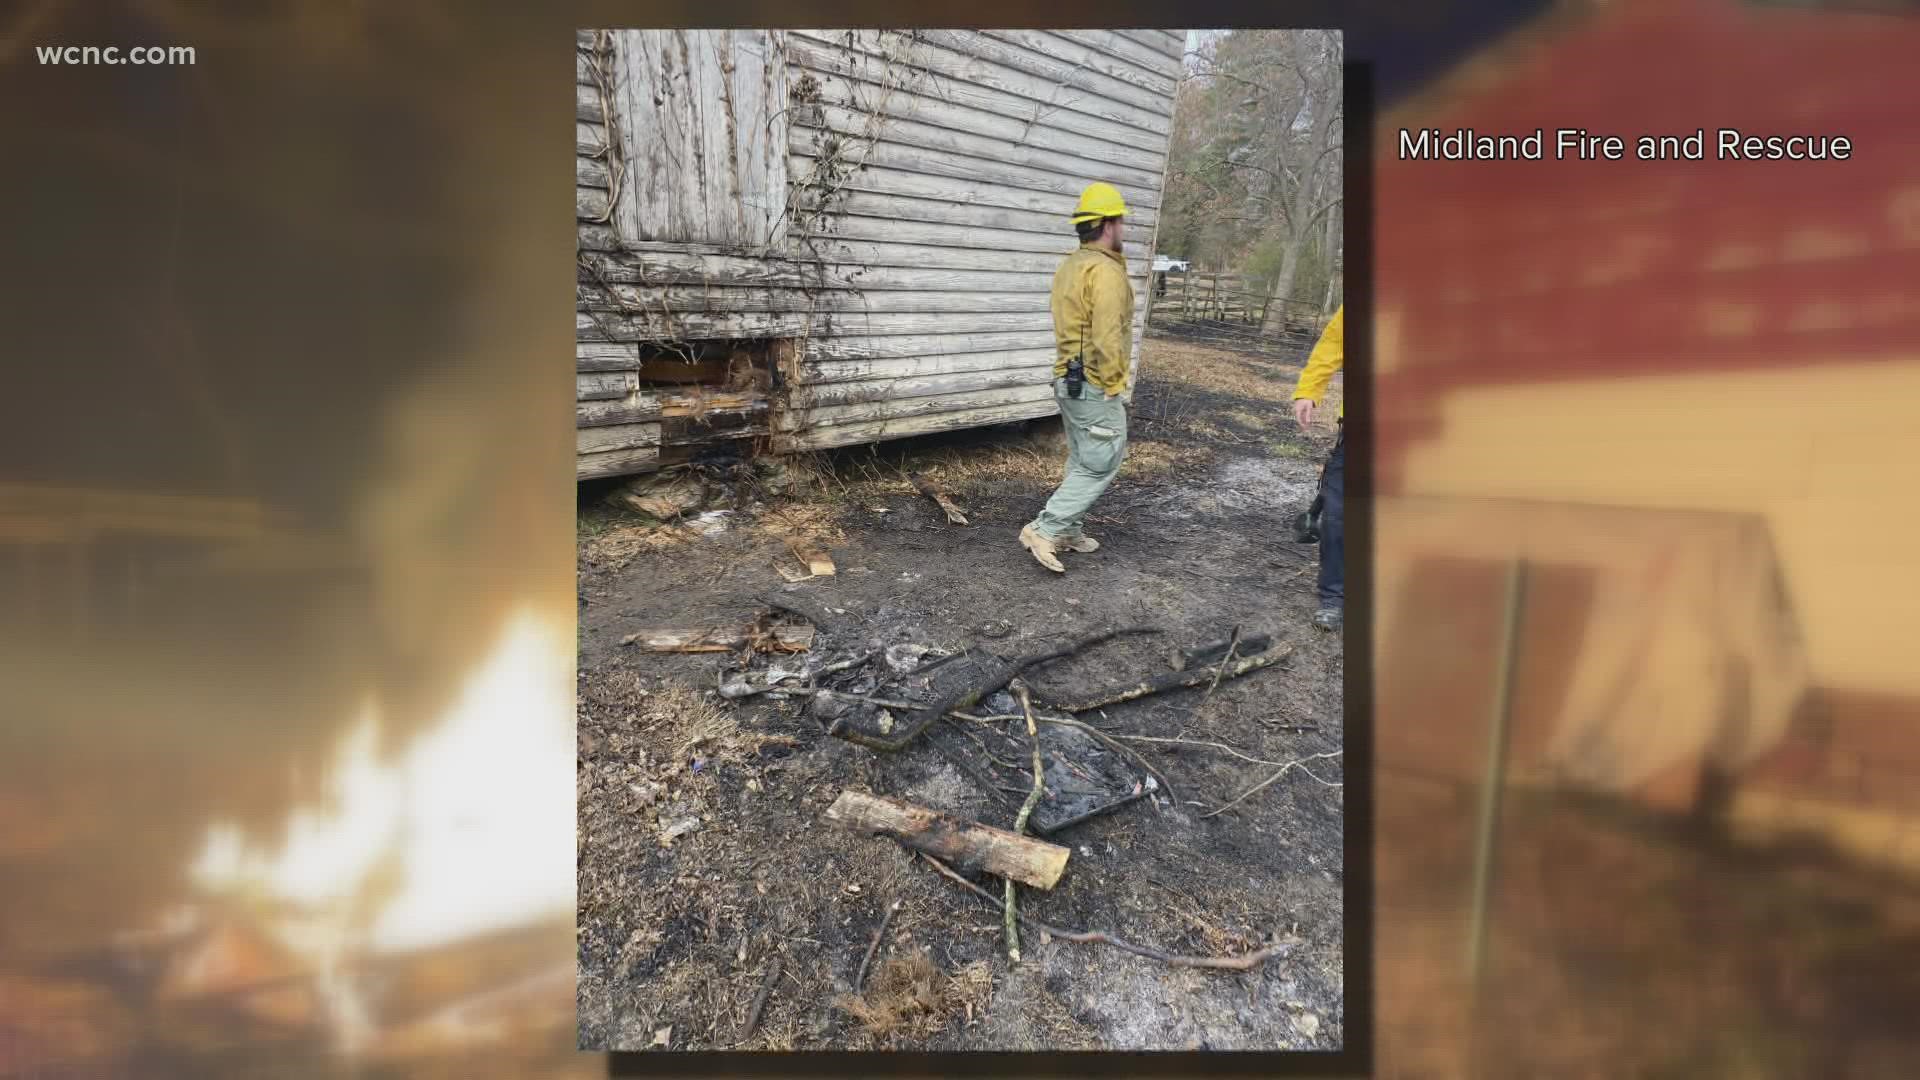 Midland Fire & Rescue said they responded to at least 13 fires since 7 a.m. on Saturday, Dec. 4.